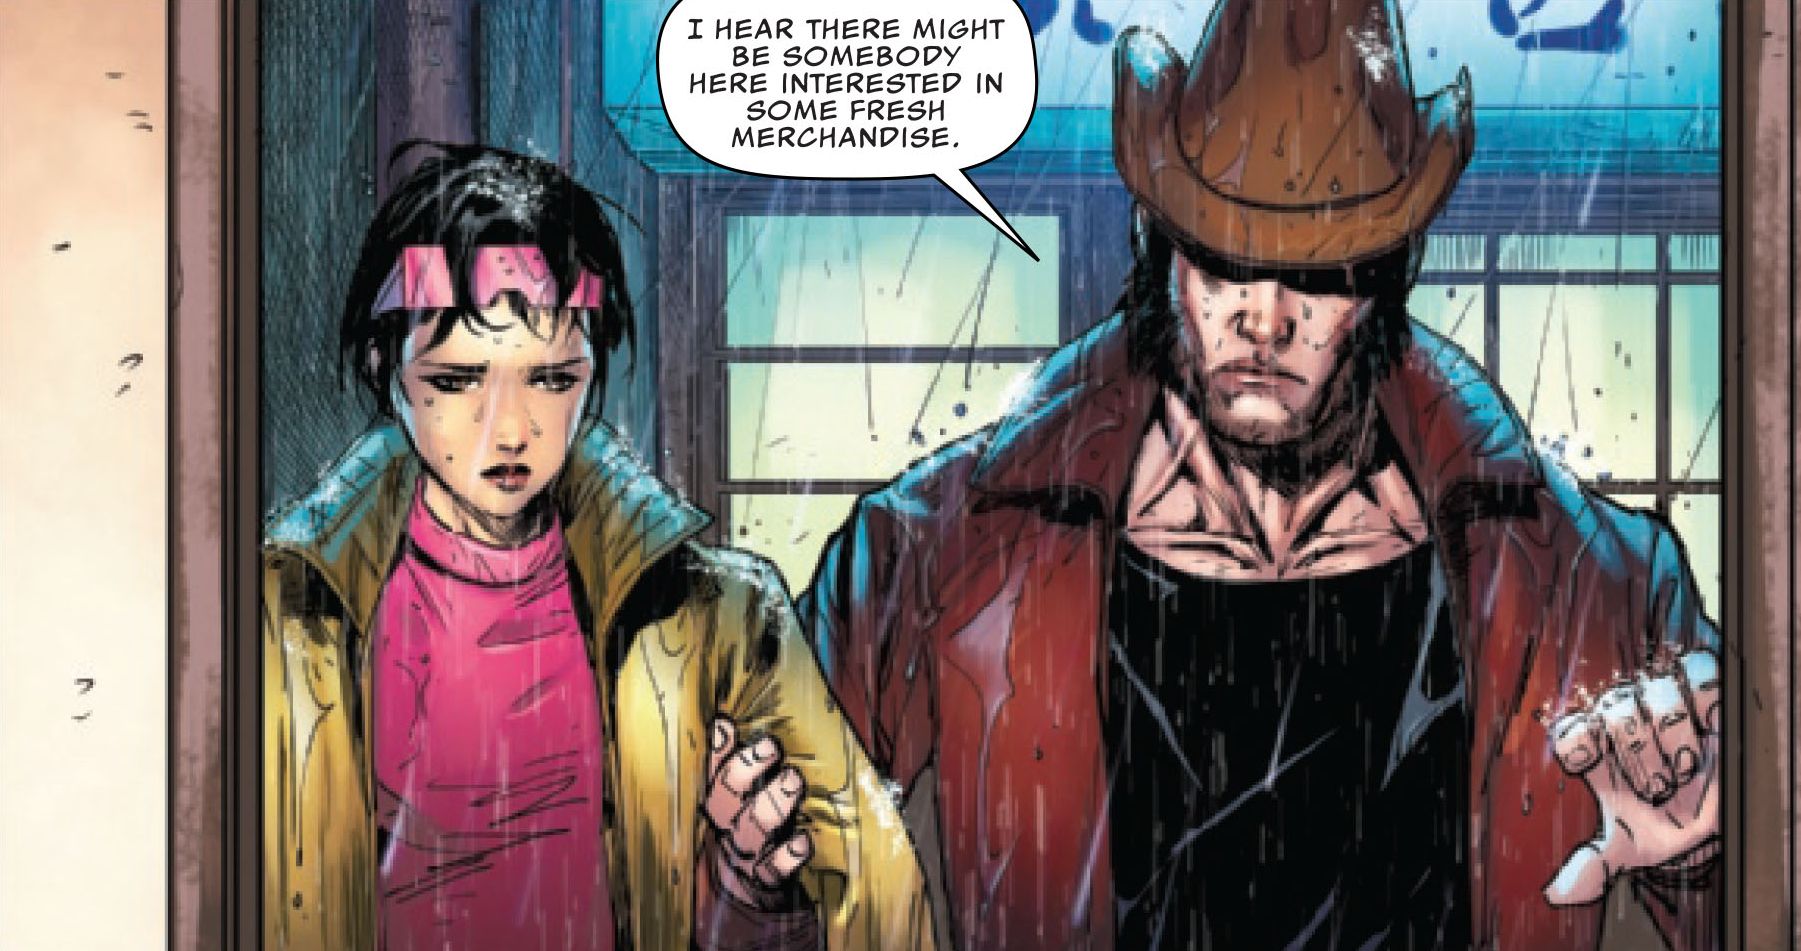 Jubilee and Wolverine in disguise